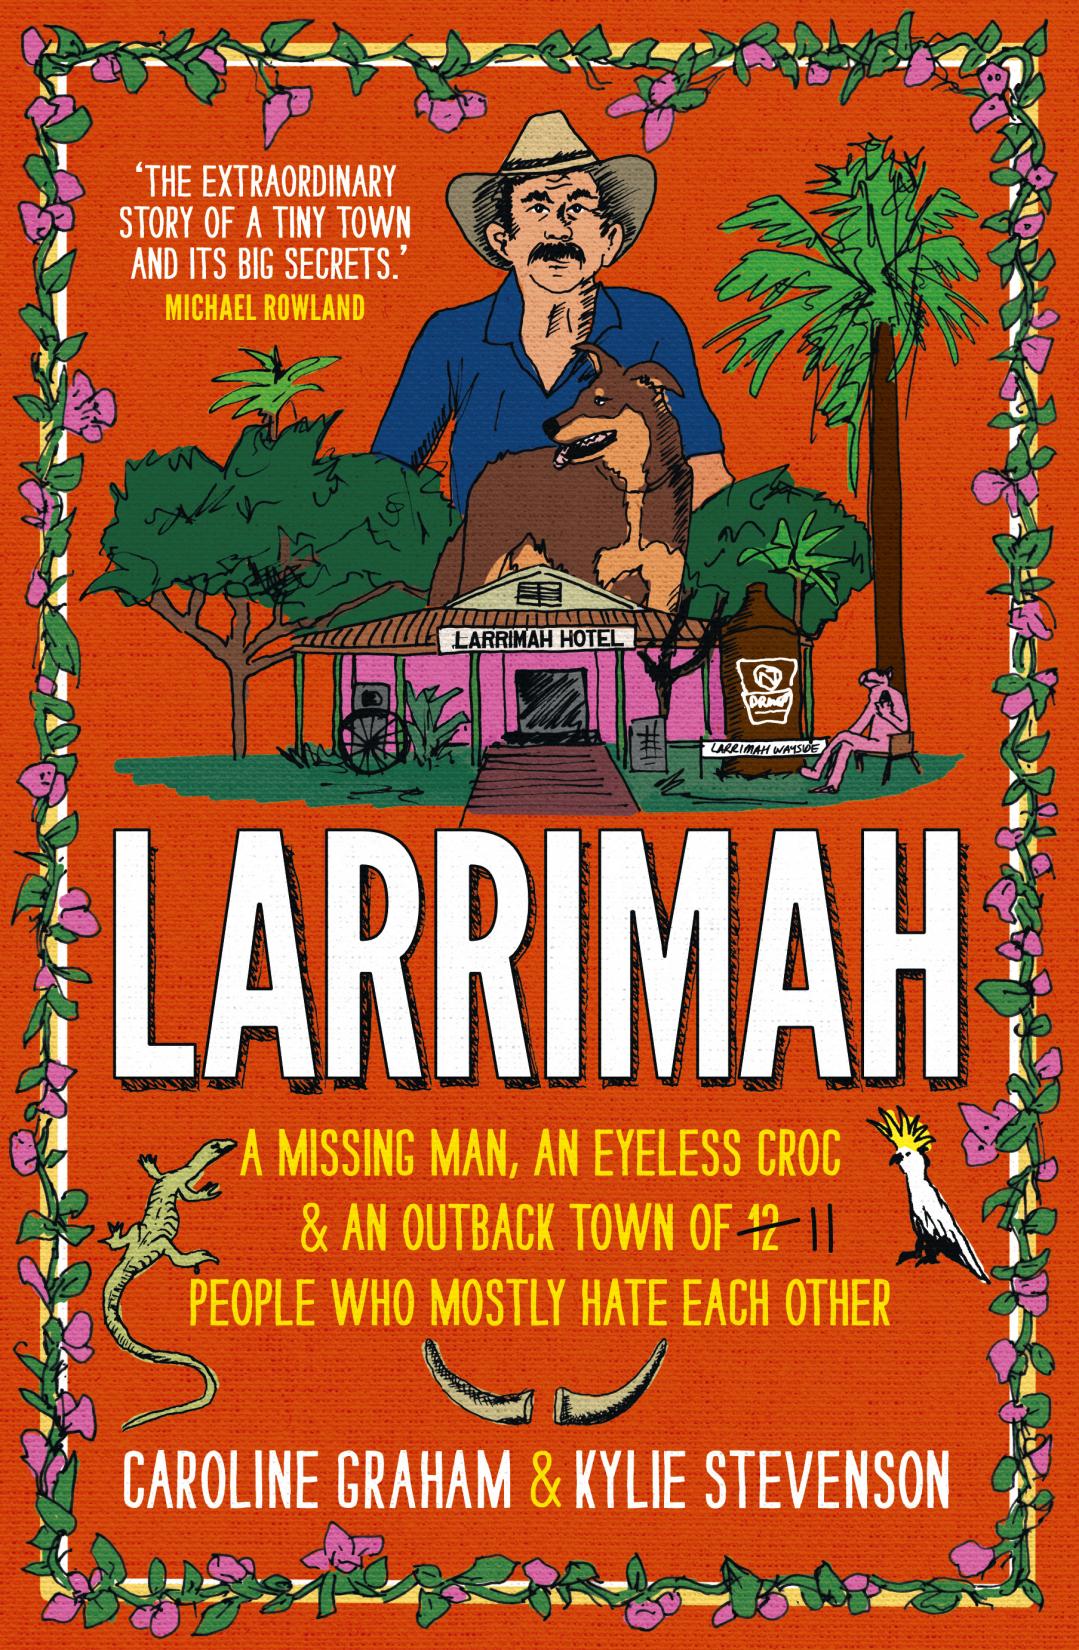 Pciture of red front cover of book. Illustration of light skinned middle aged man with brown hair and moustache. Wearing navy blue shirt and a cowboy hat. Brown dog standing in front of man. Picture of pink 'Larrimah Hotel in amongst trees. 